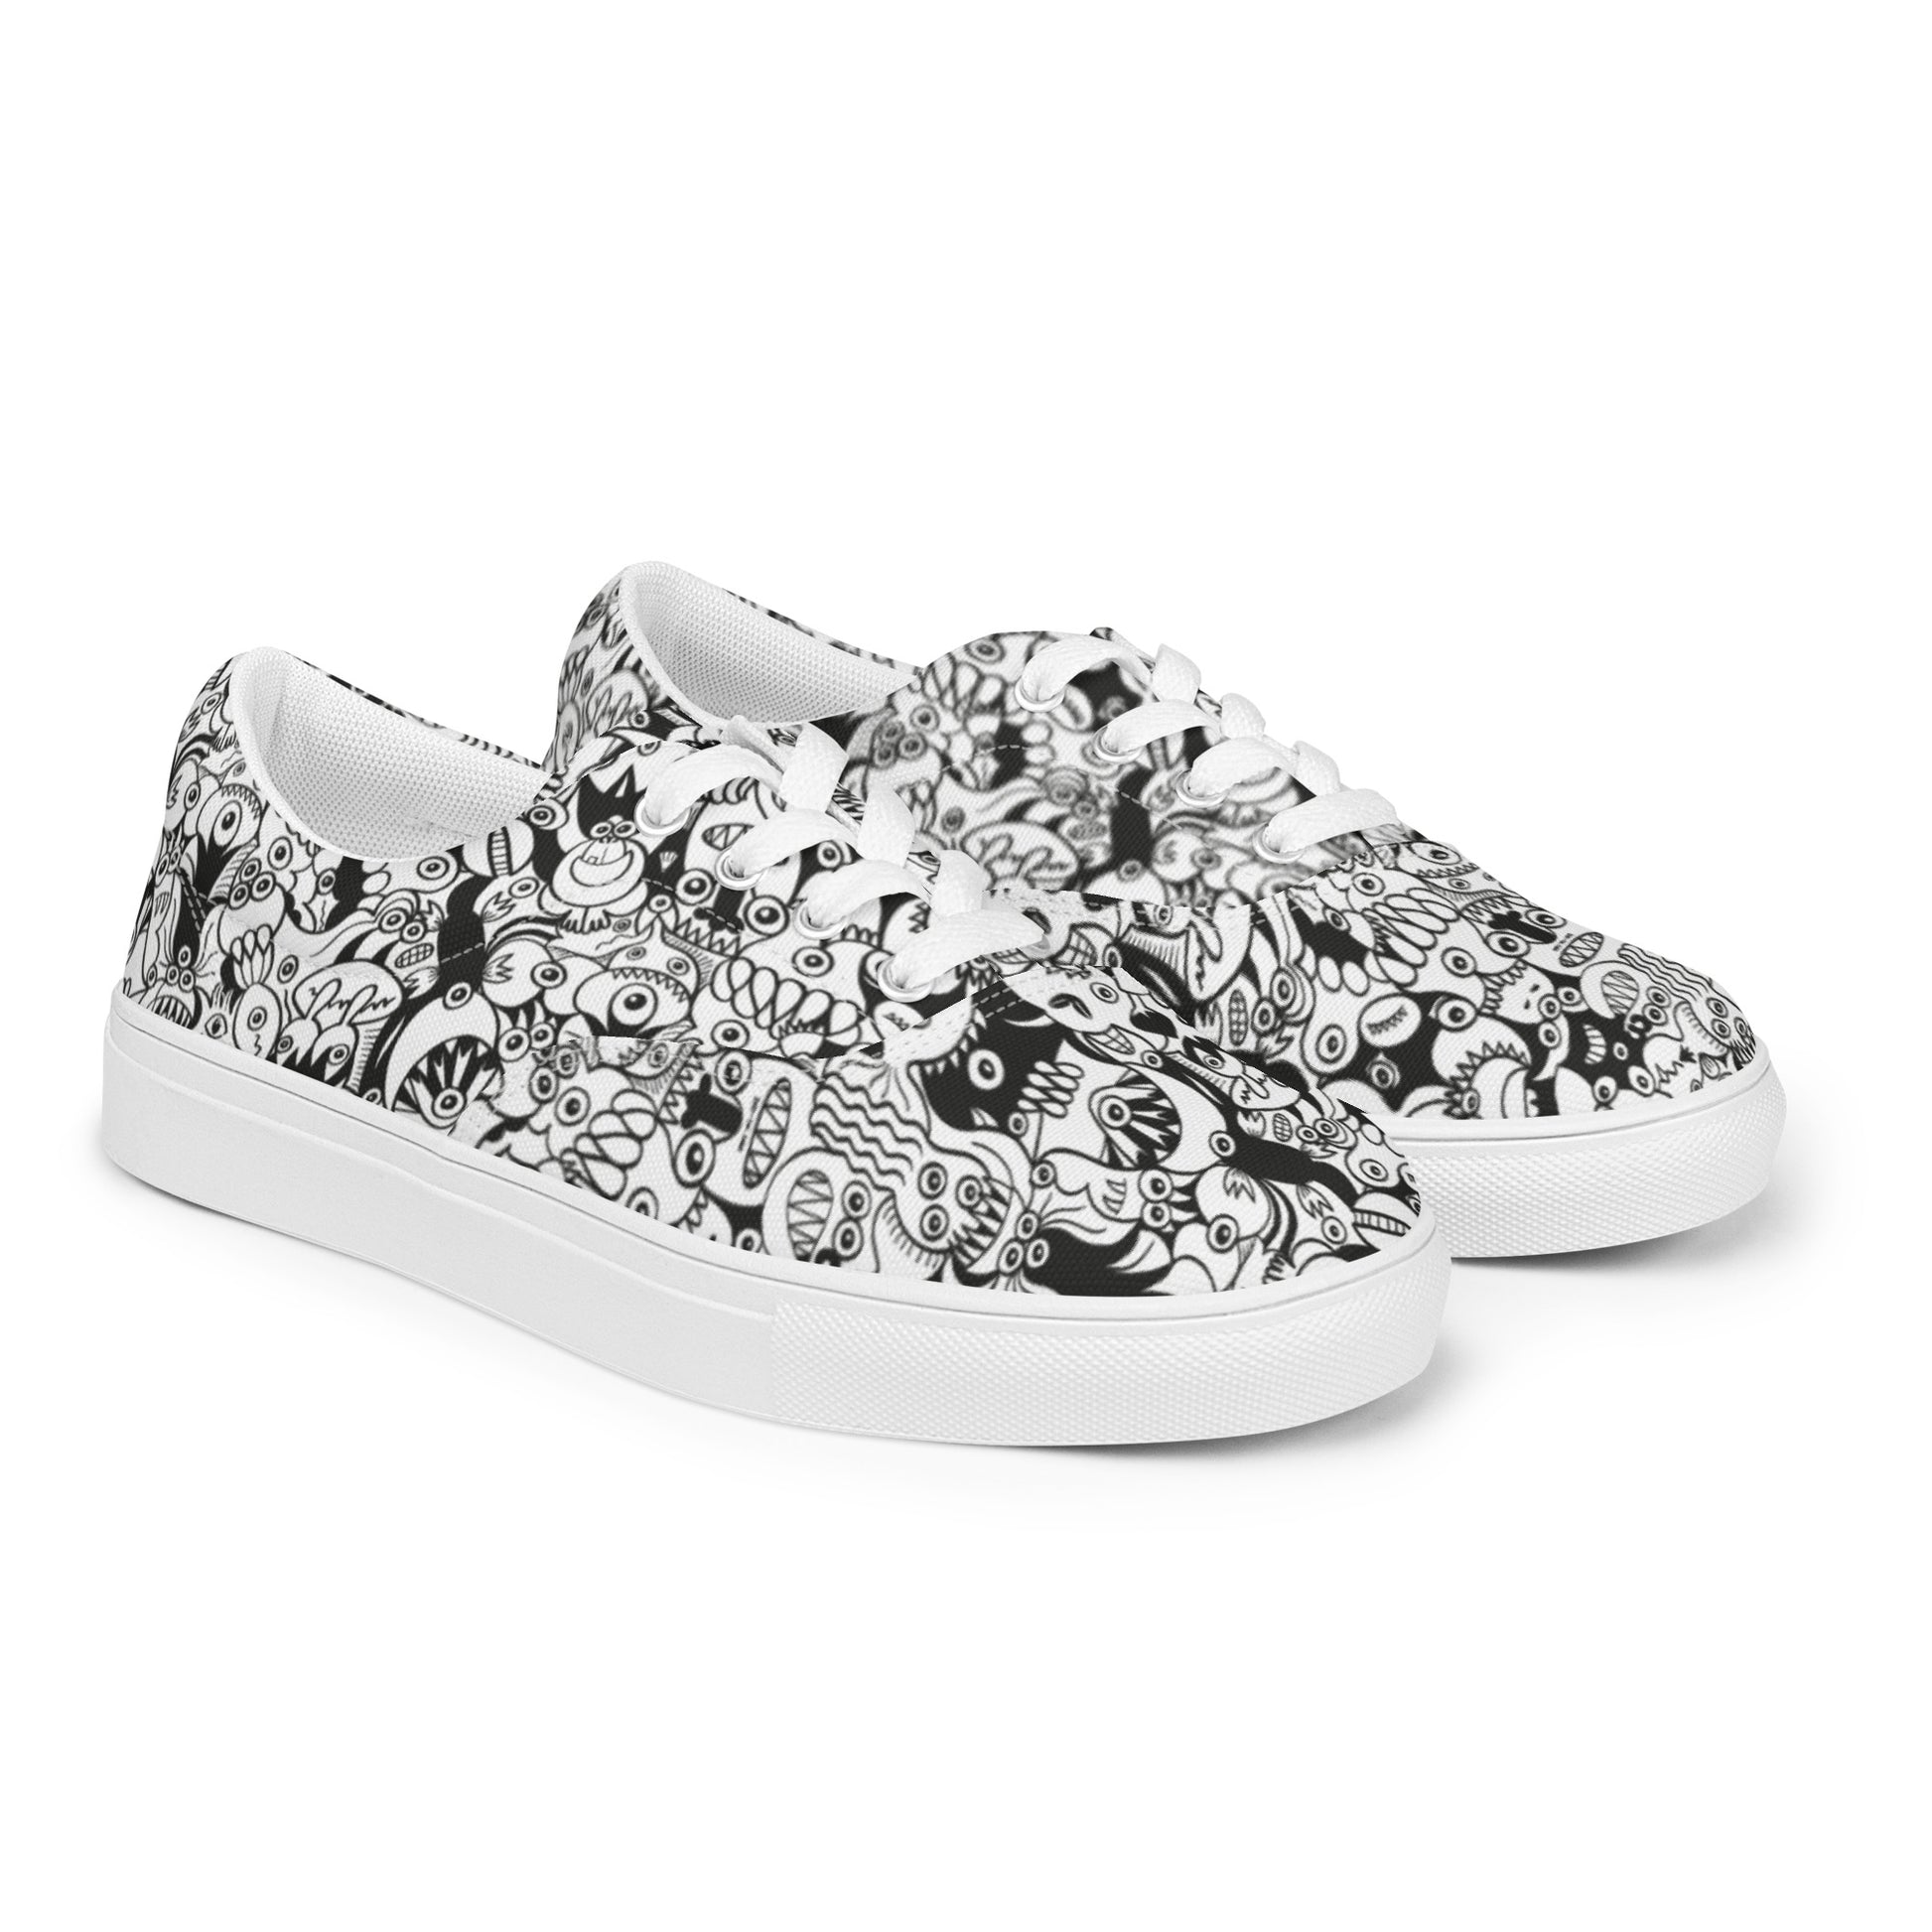 Black and white cool doodles art Women’s lace-up canvas shoes. Overview